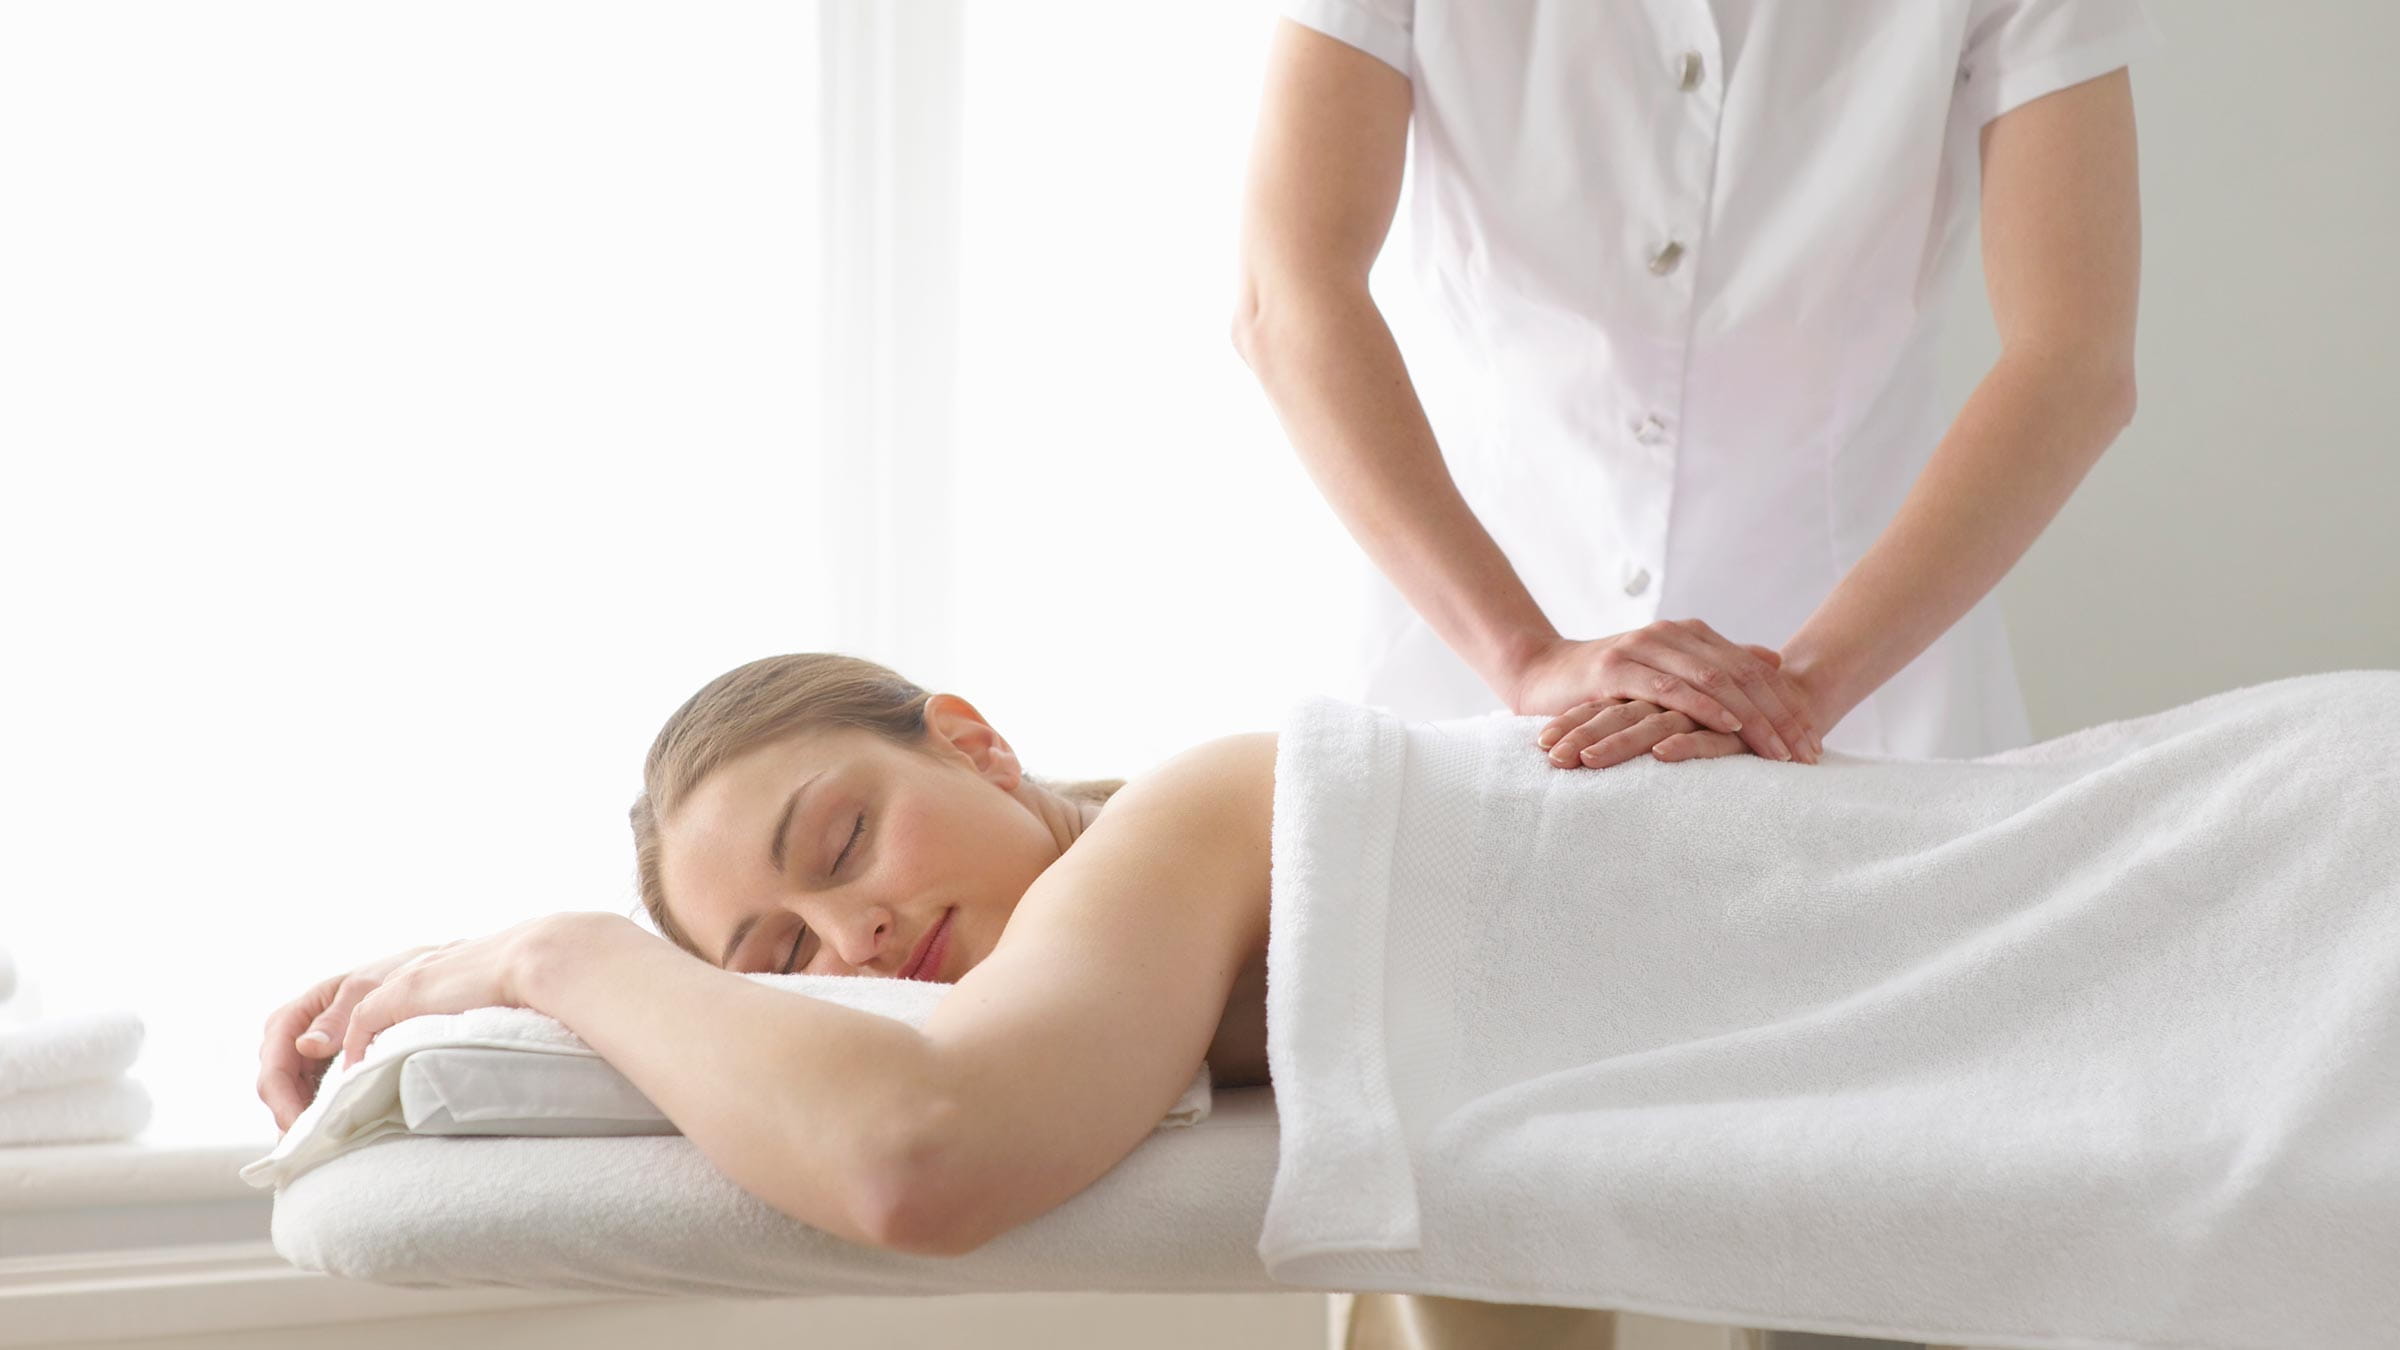 The benefits of therapeutic massage